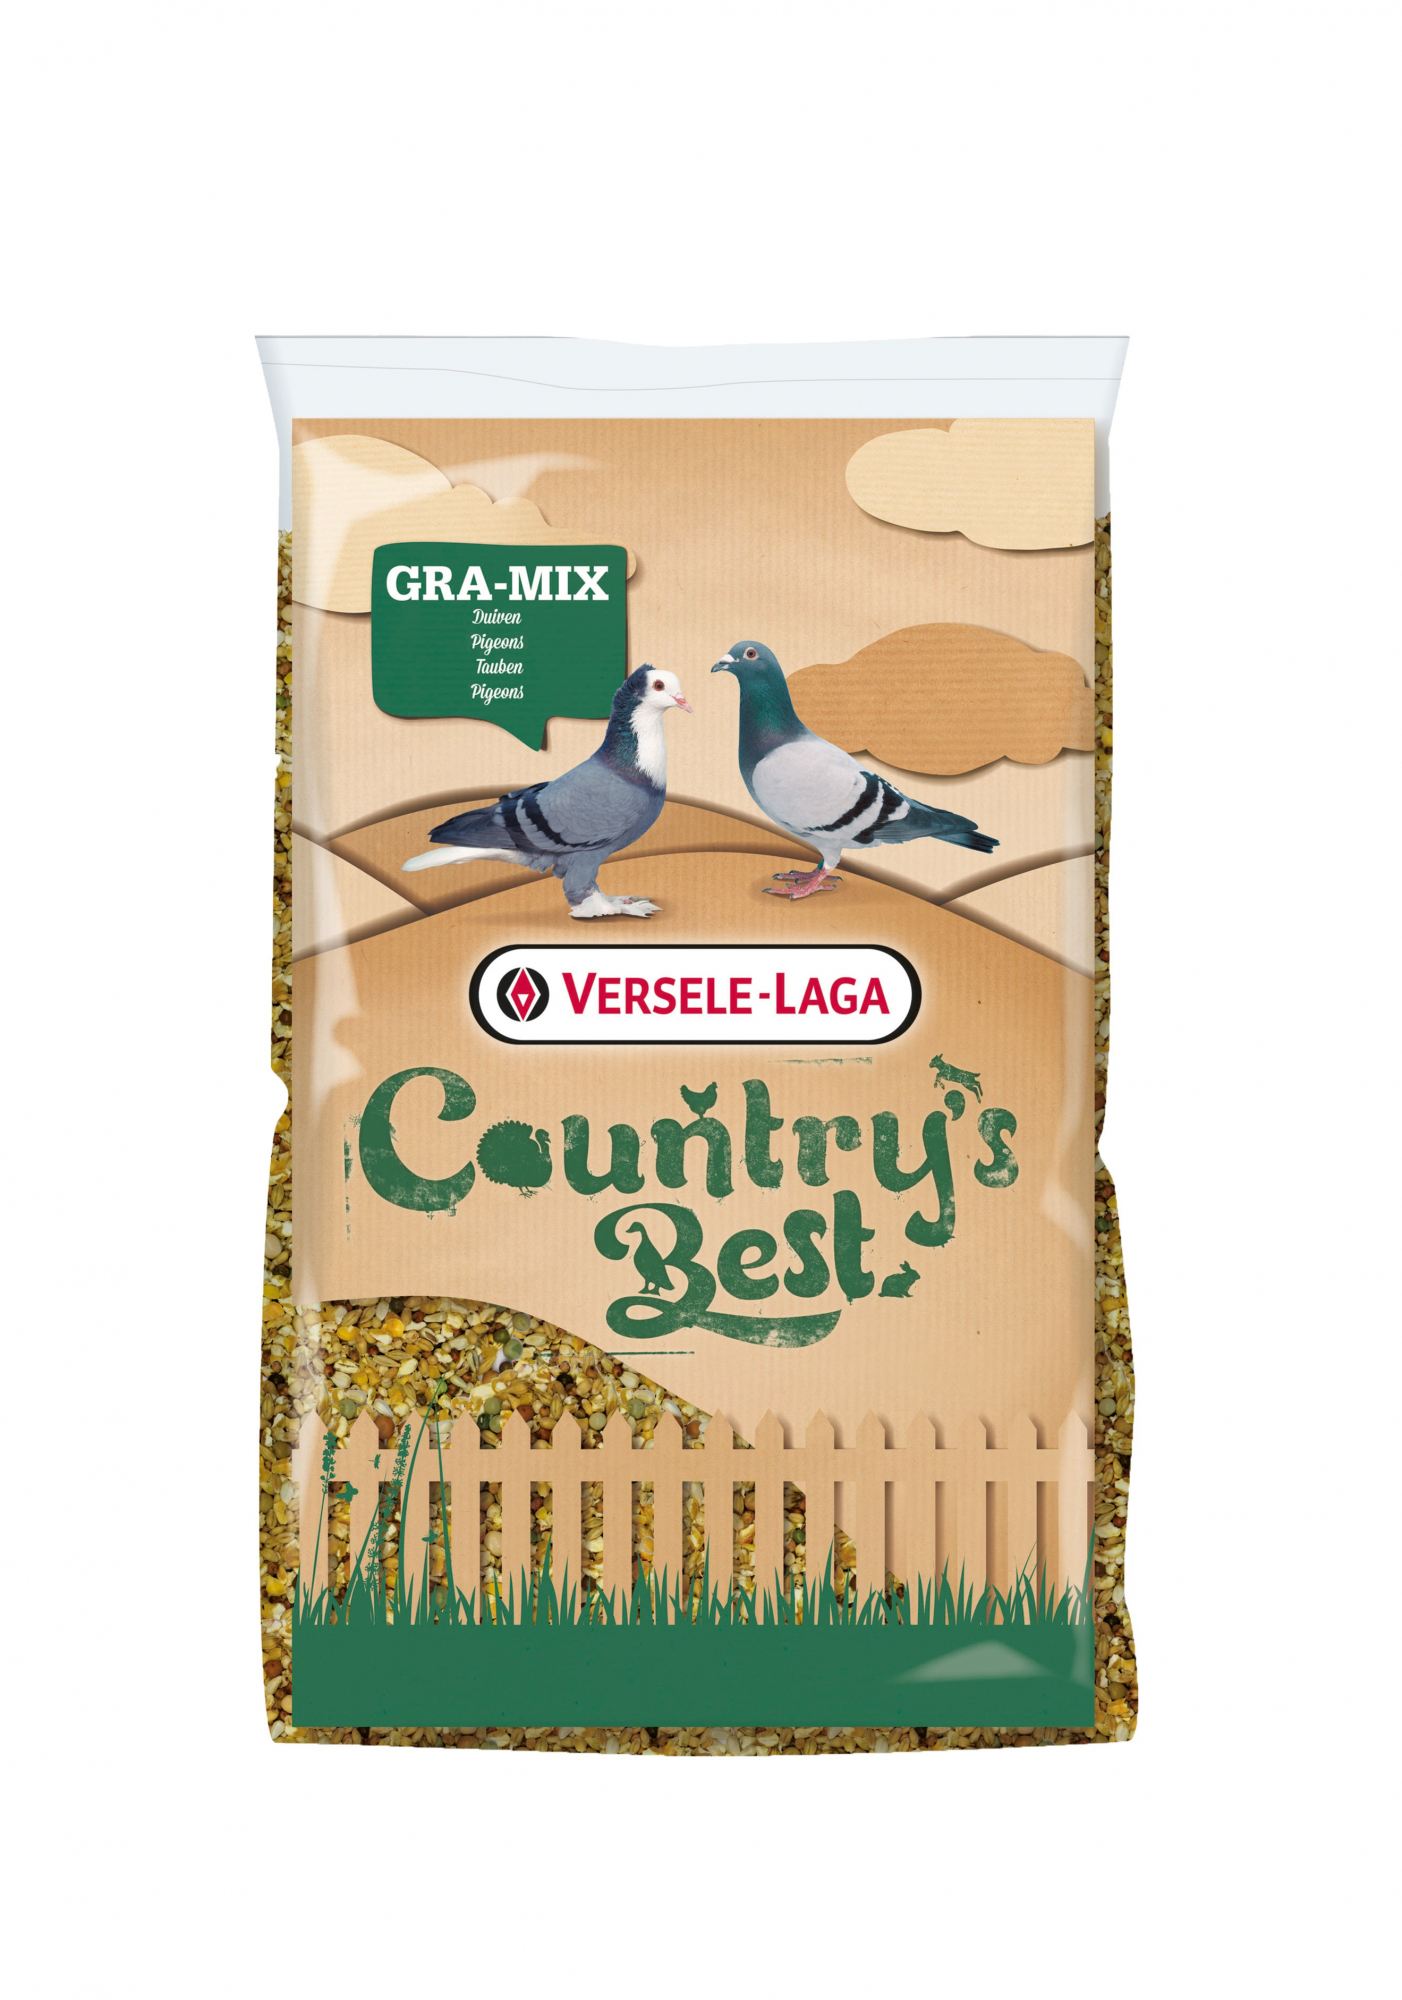 Gra-Mix Kweekduiven Eco Country's Best